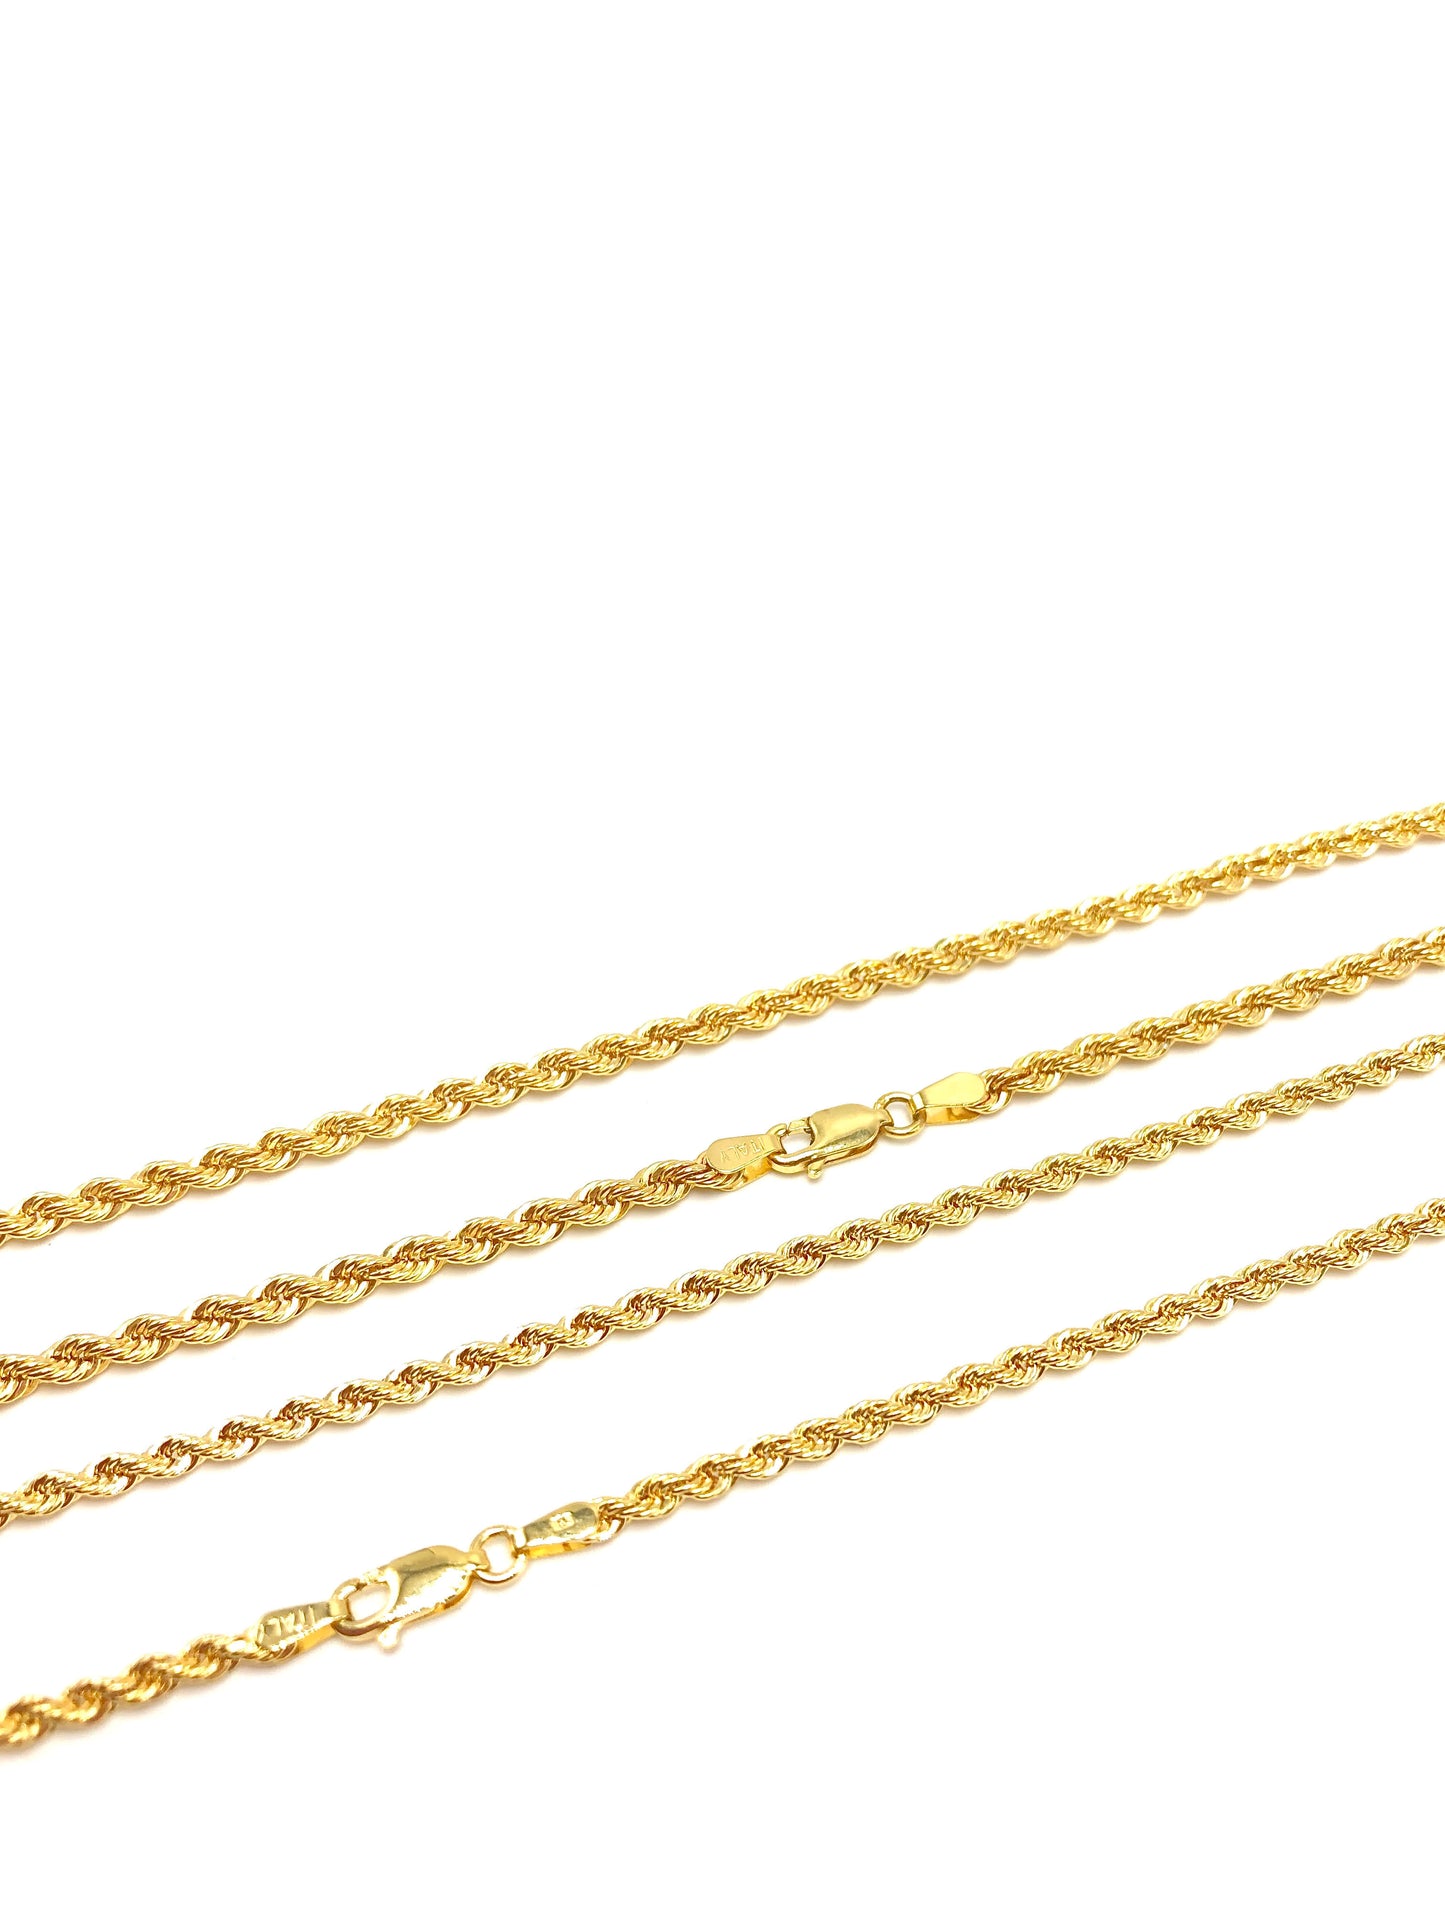 hip-hop style chains